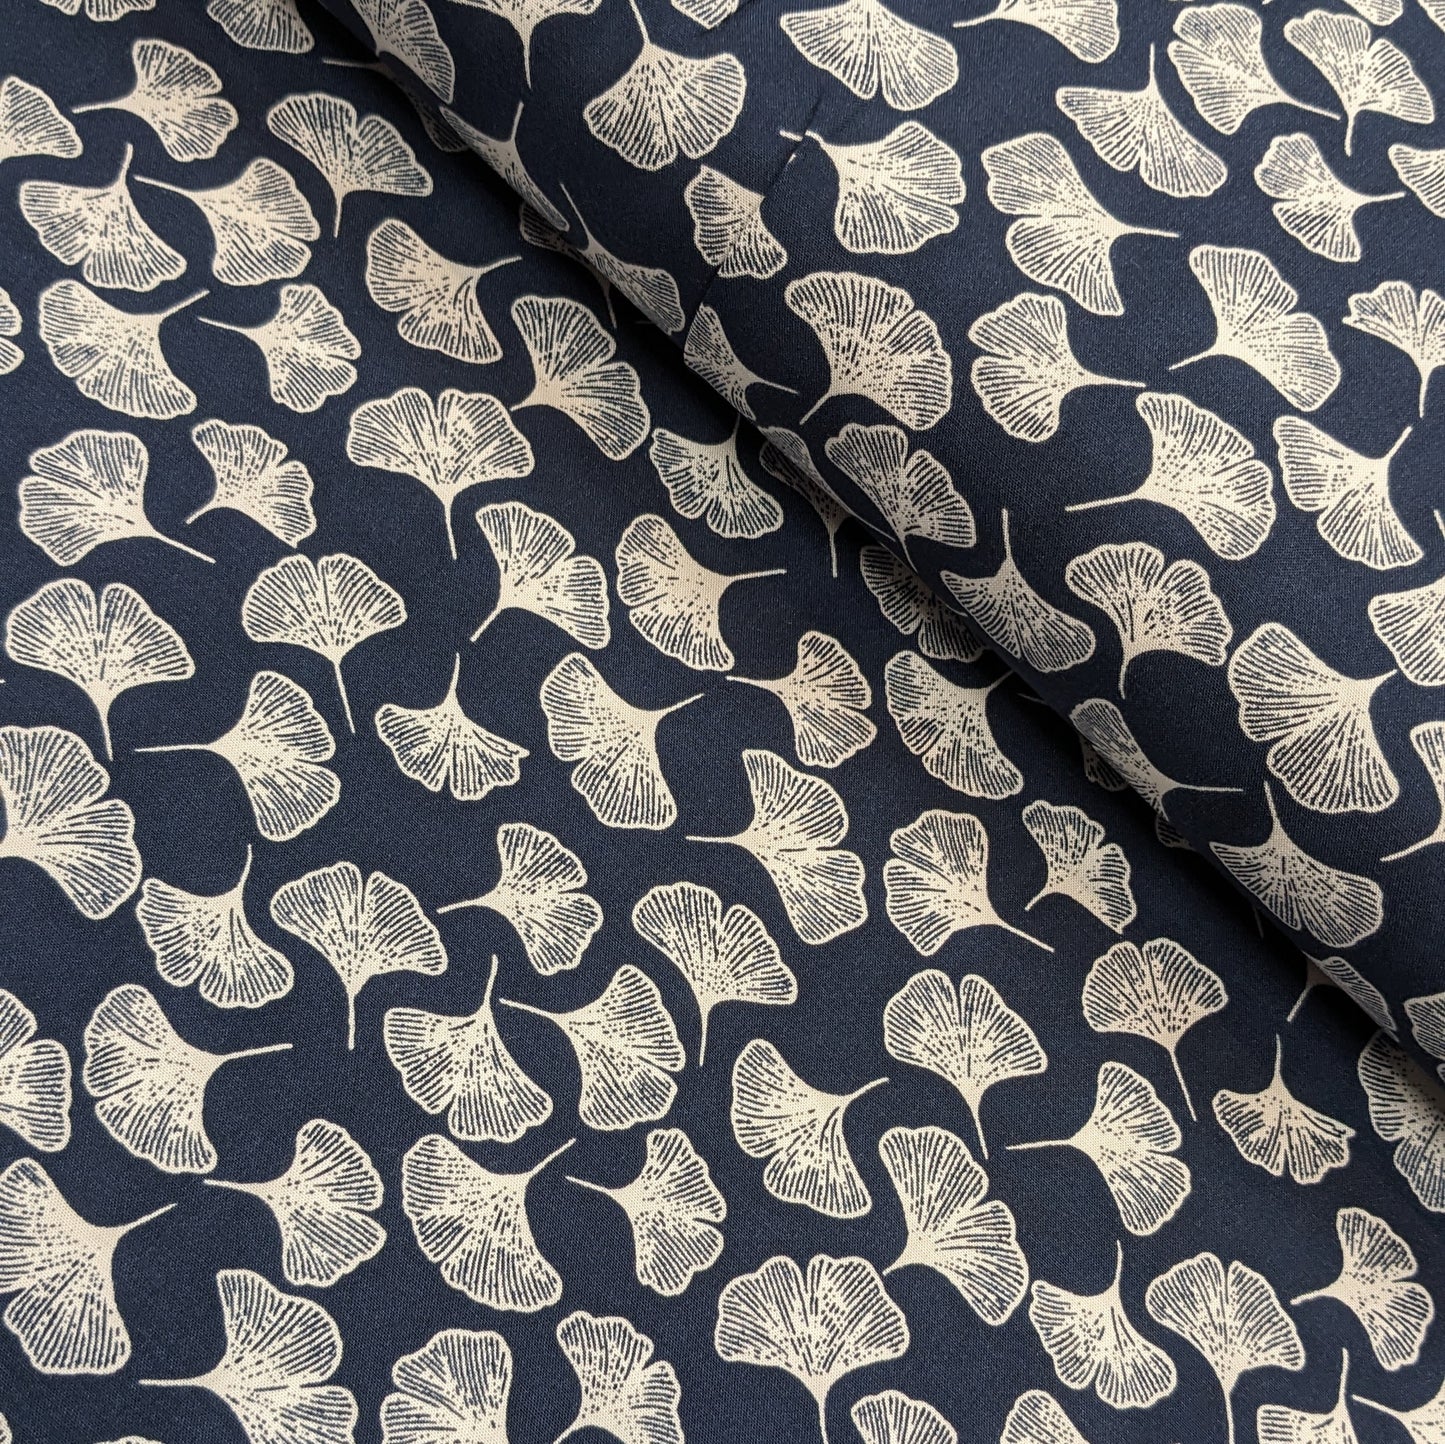 Viscose Fabric - Ginkgo Leaves on Navy